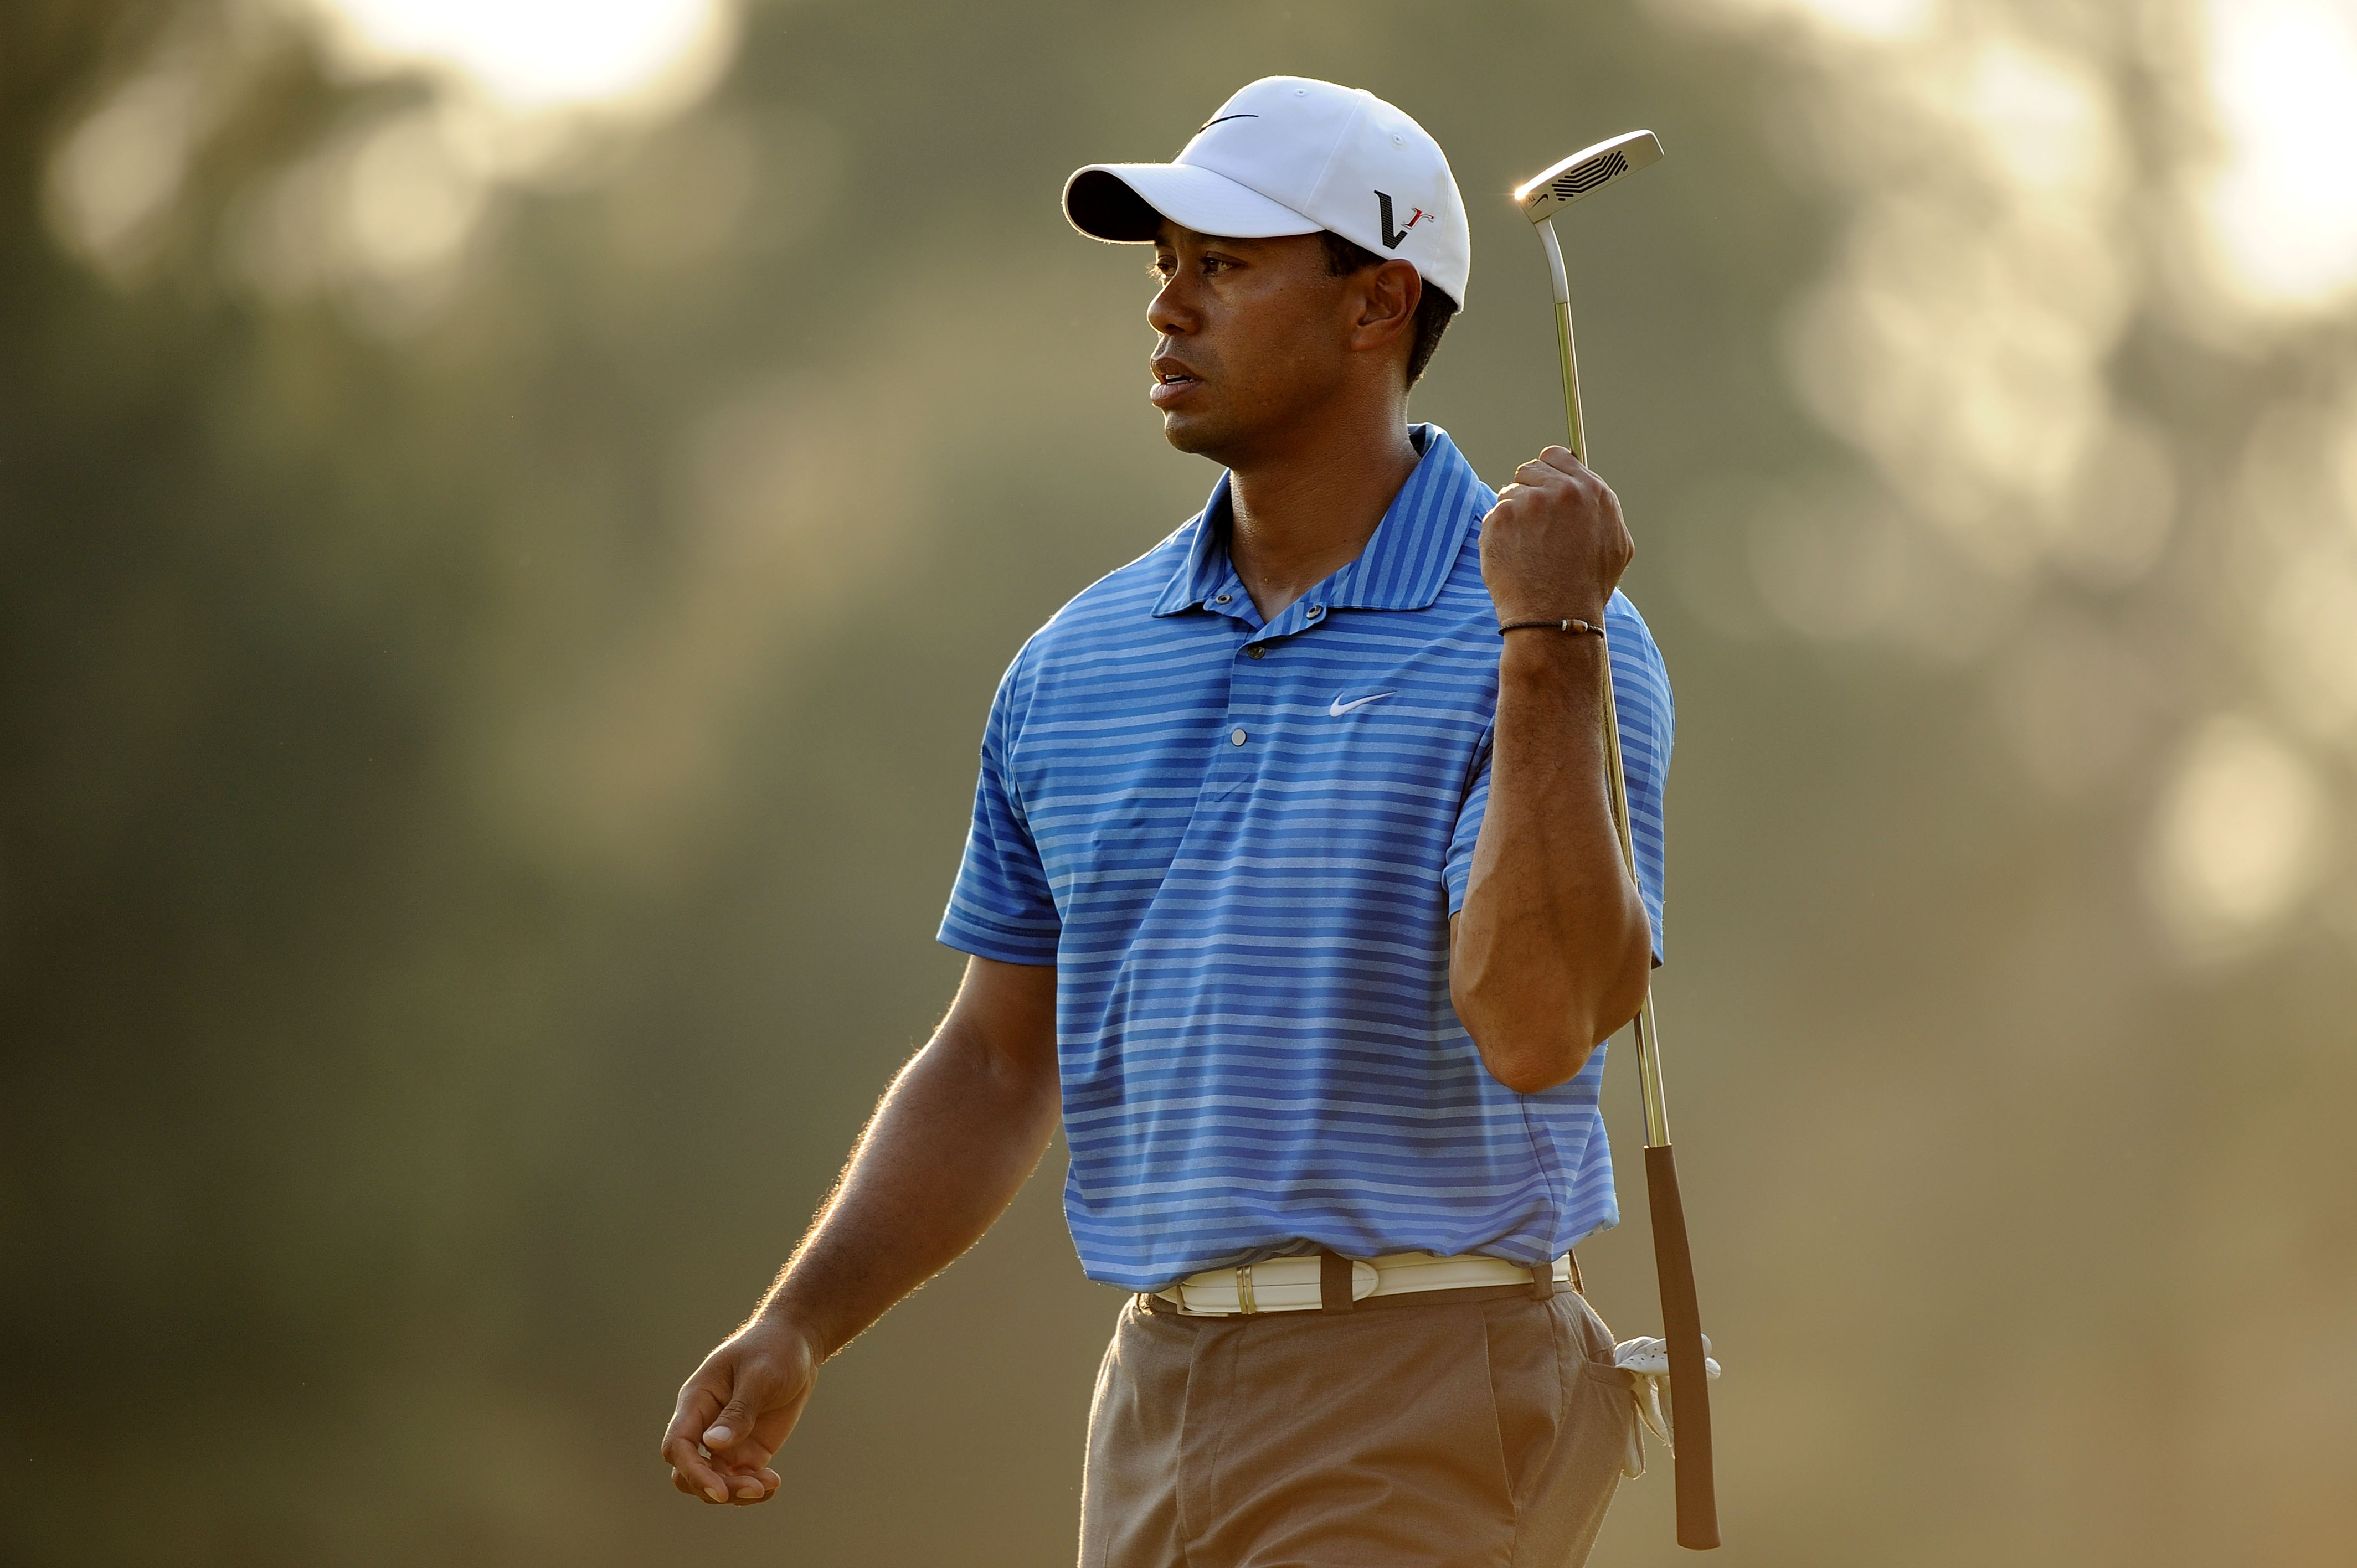 AUGUSTA, GA - APRIL 09:  Tiger Woods walks across the 17th green during the third round of the 2011 Masters Tournament at Augusta National Golf Club on April 9, 2011 in Augusta, Georgia.  (Photo by Harry How/Getty Images)